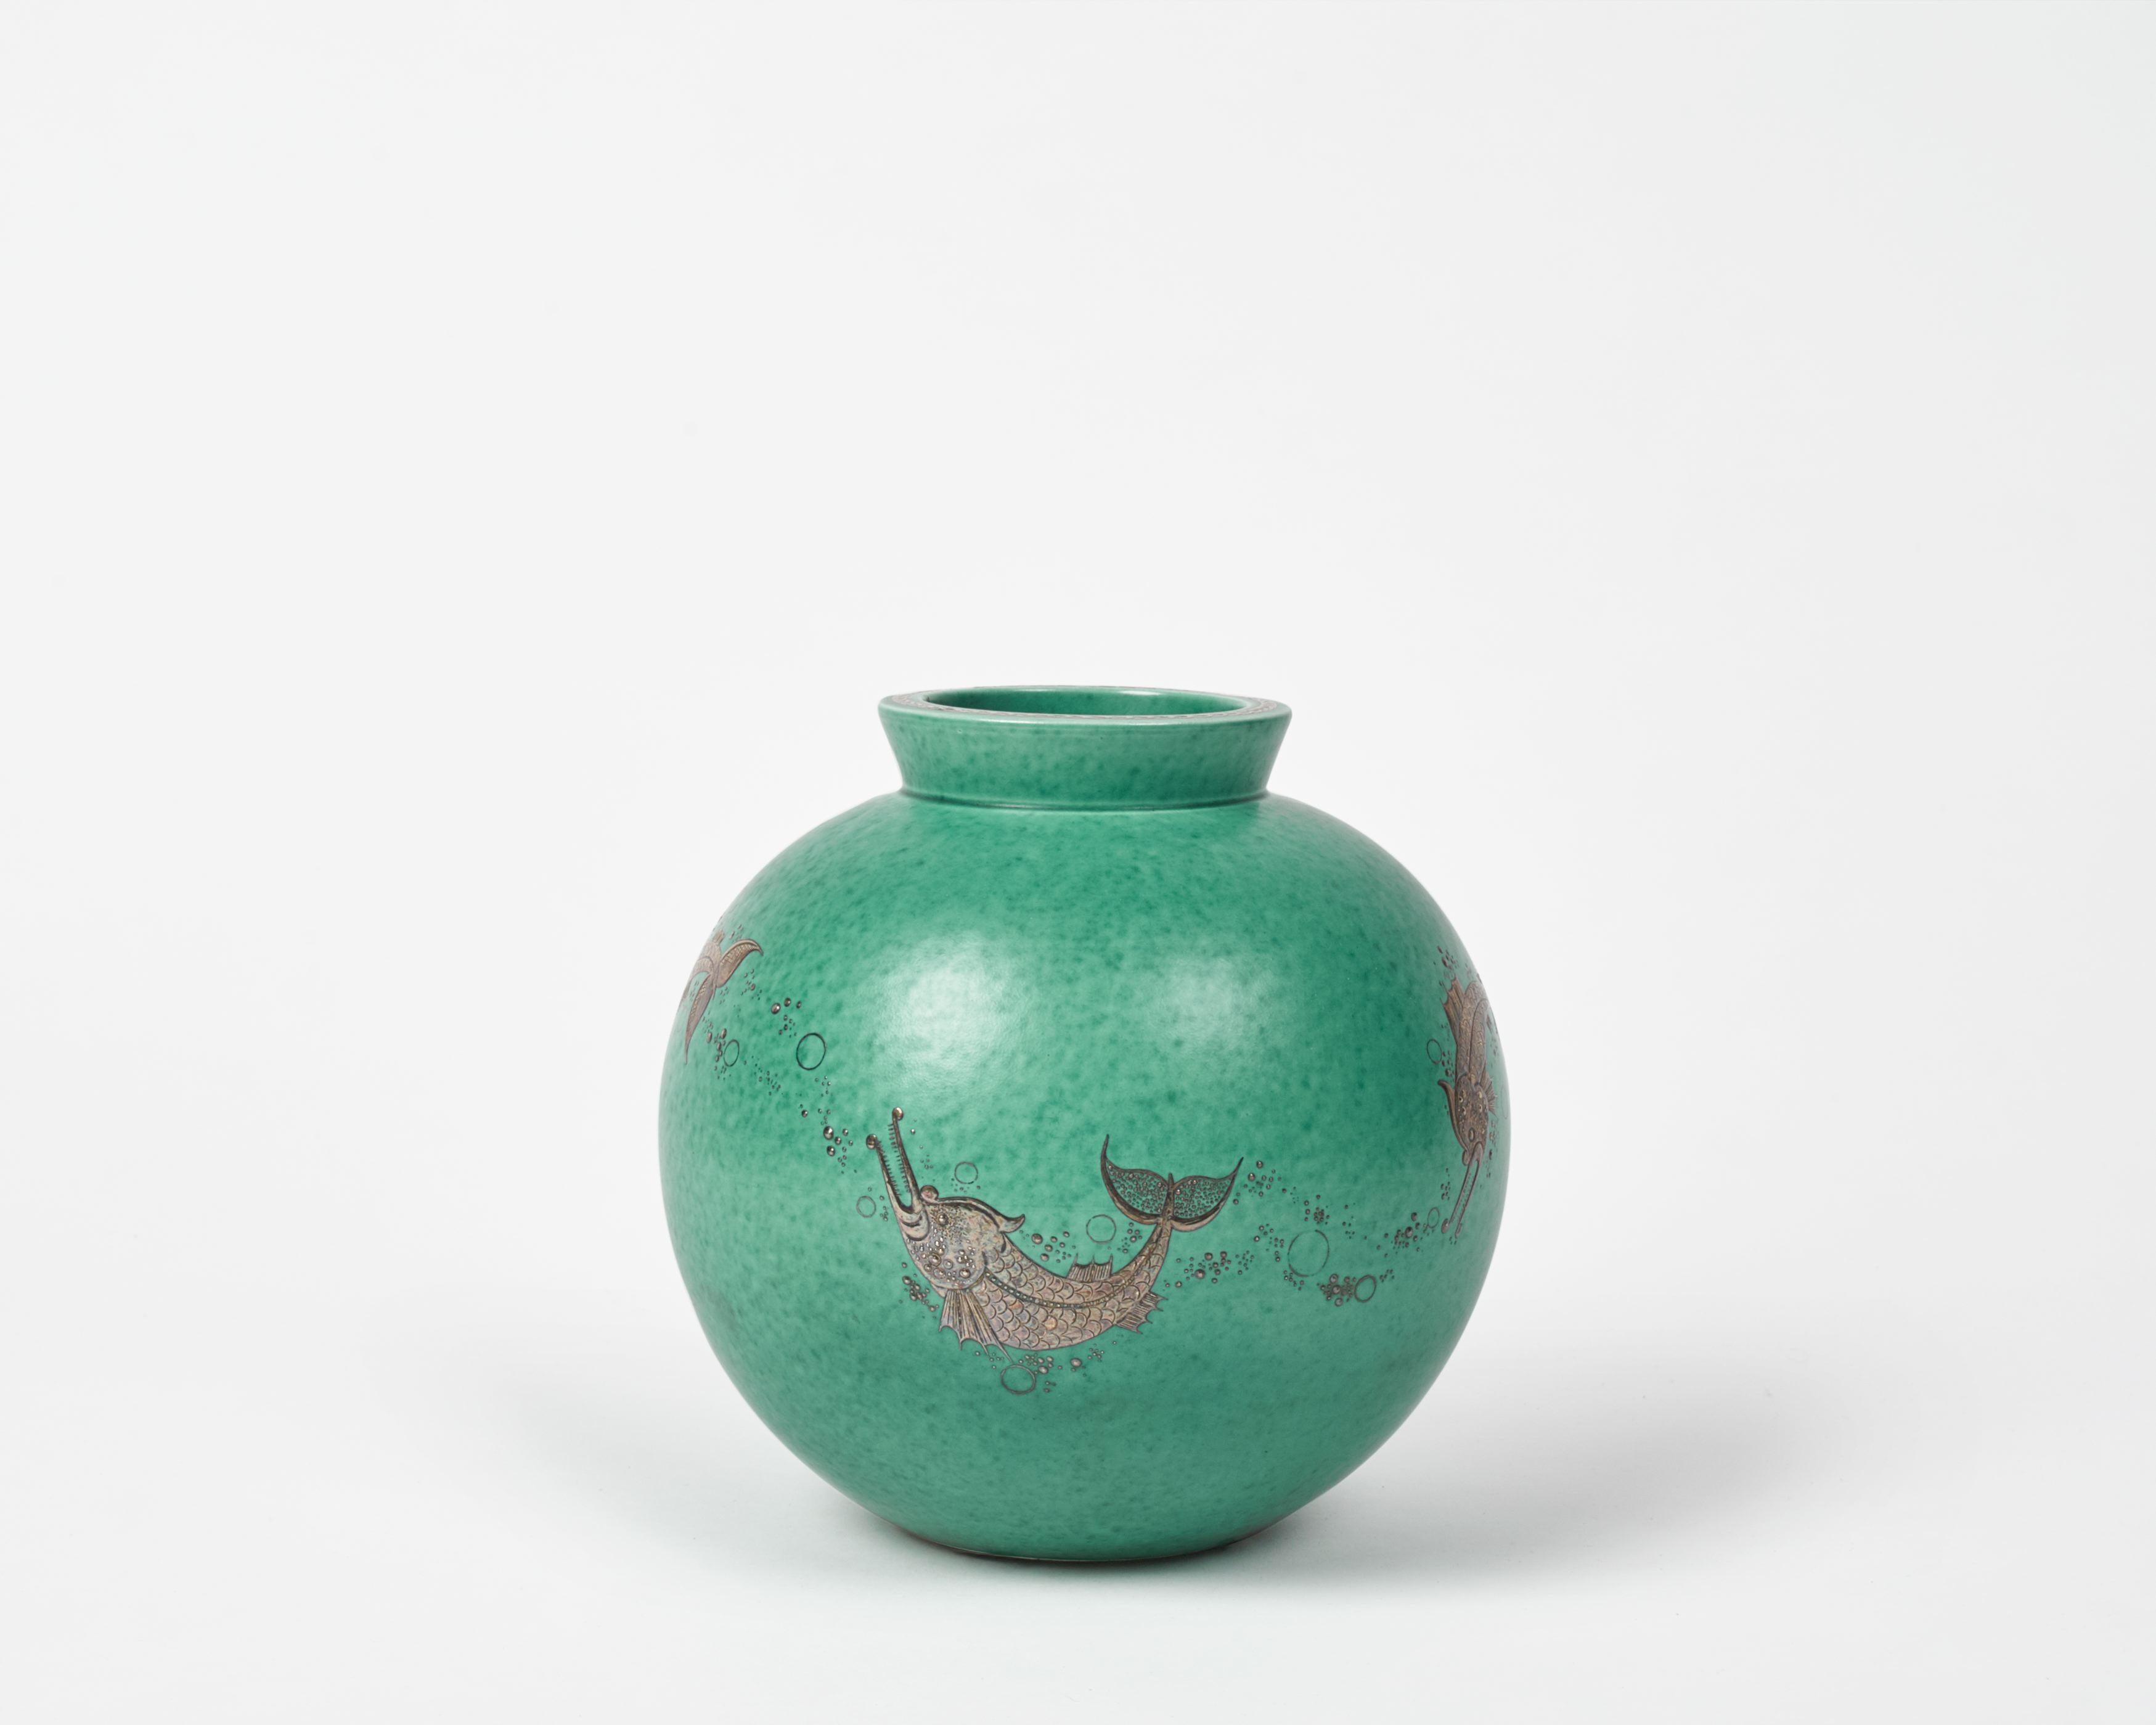 This beautiful piece is part of the artist's Argenta Series, produced for the Gustavsberg Factory, which first won him major success. The series includes everything from ashtrays to 60 kg urns-- primarily in a green glaze with silver